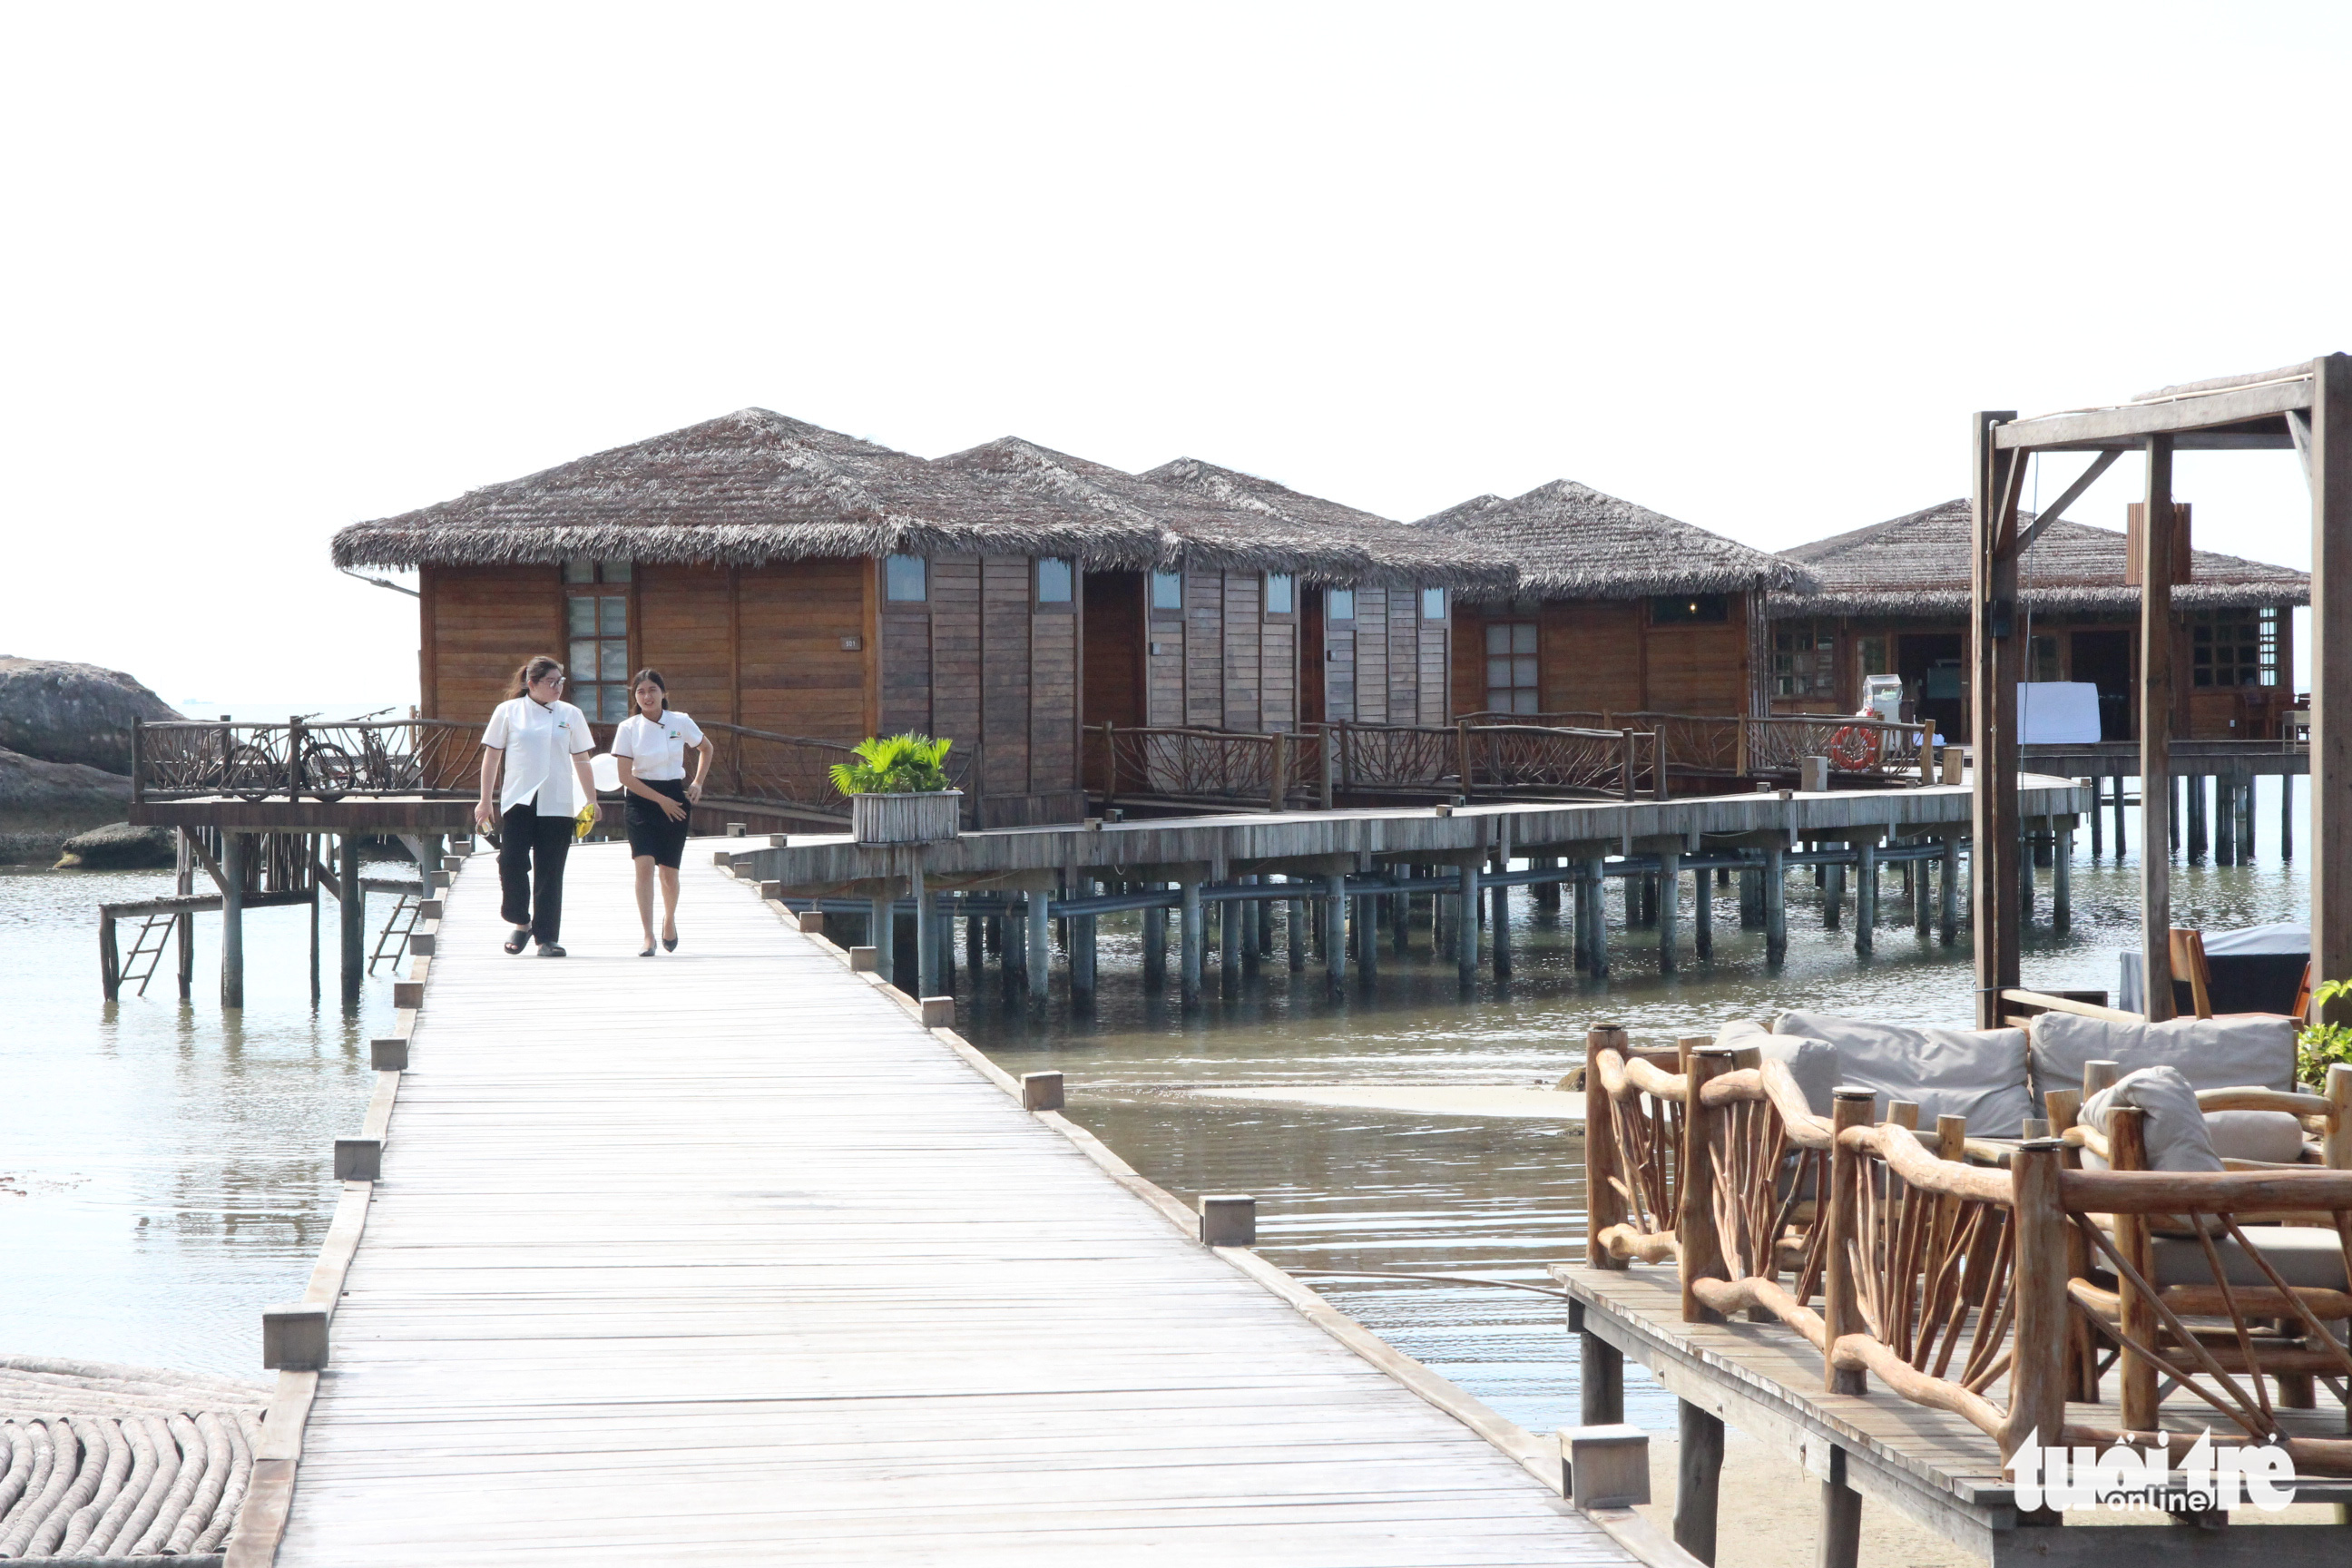 Phu Quoc probes illegal constructions in protected maritime areas